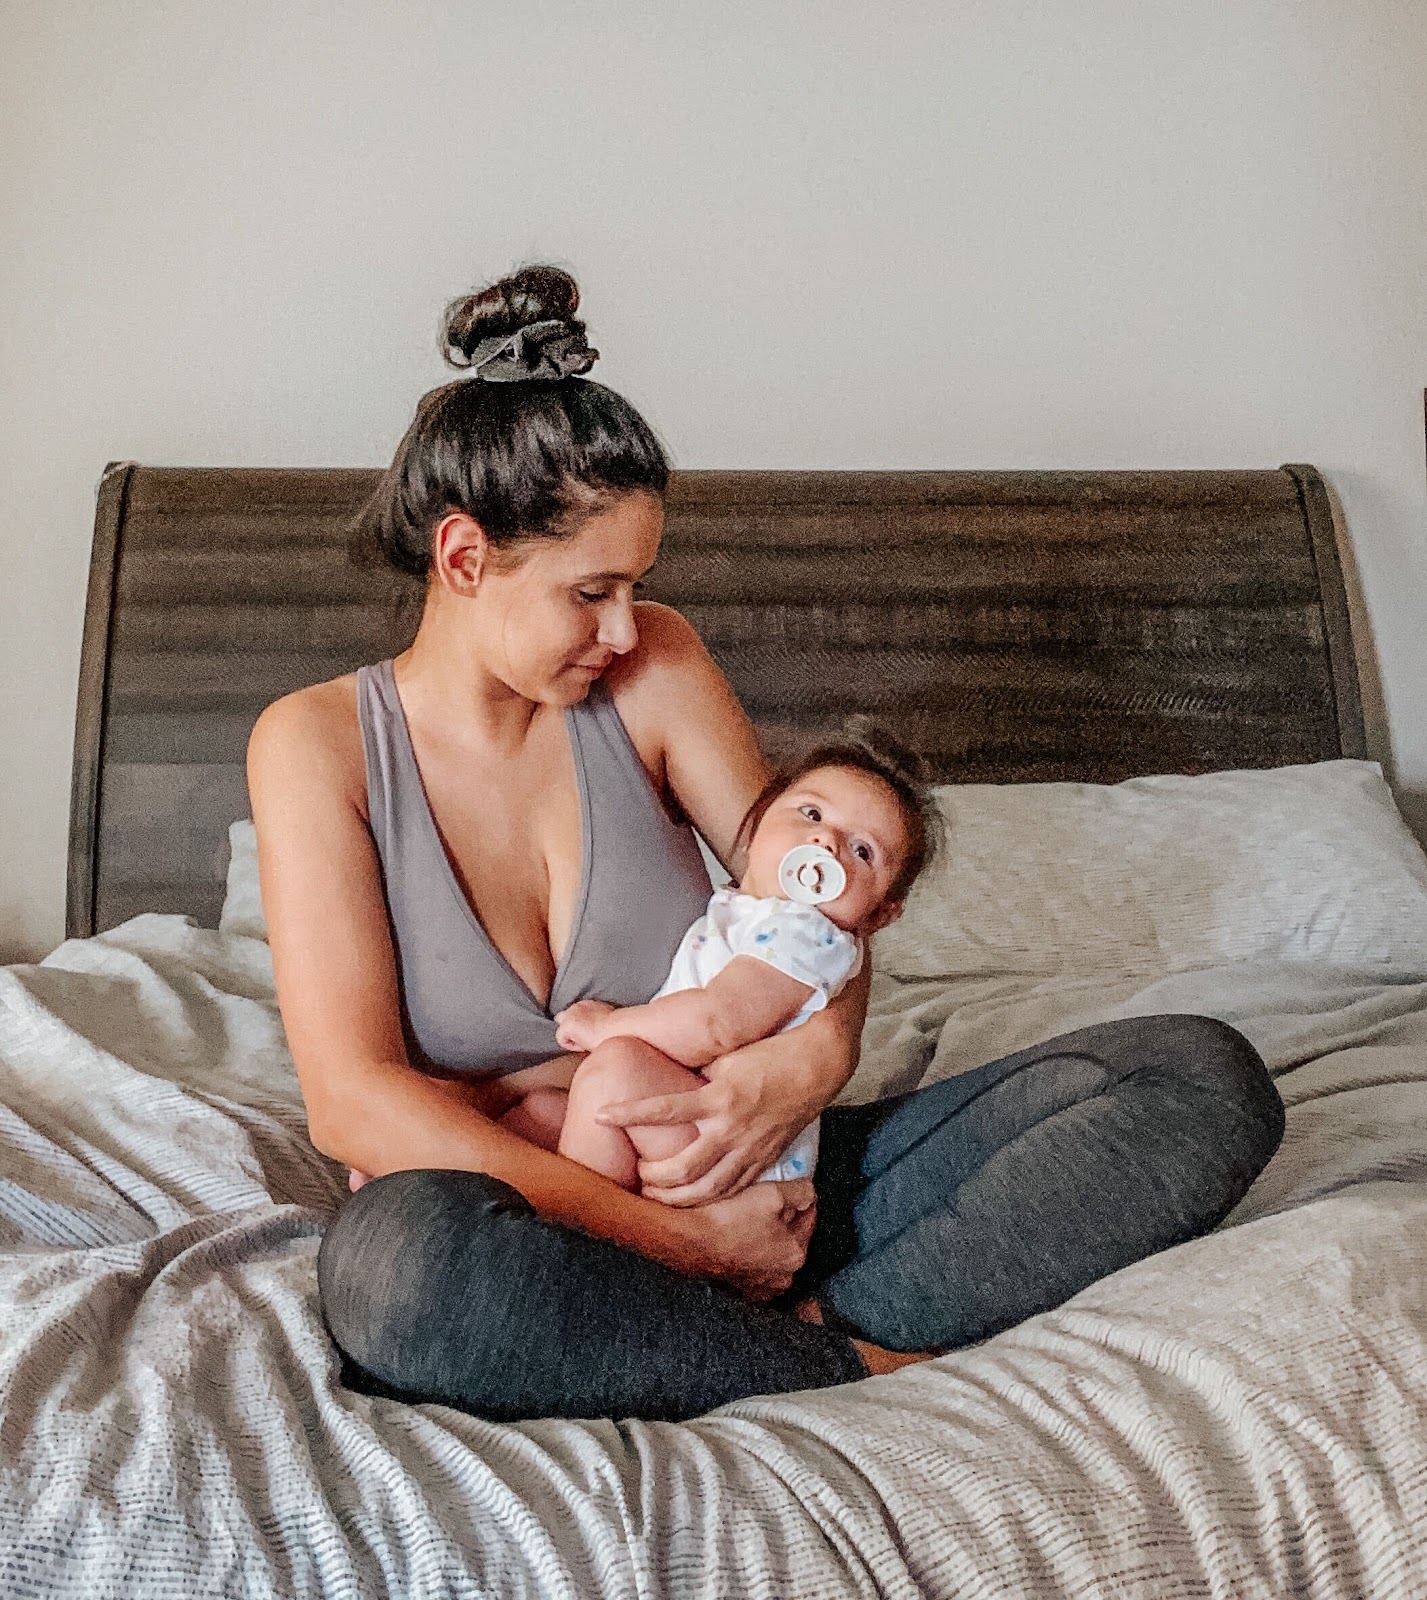 Mom-Approved Nursing Bras- A Kindred Bravely Review-Rookie